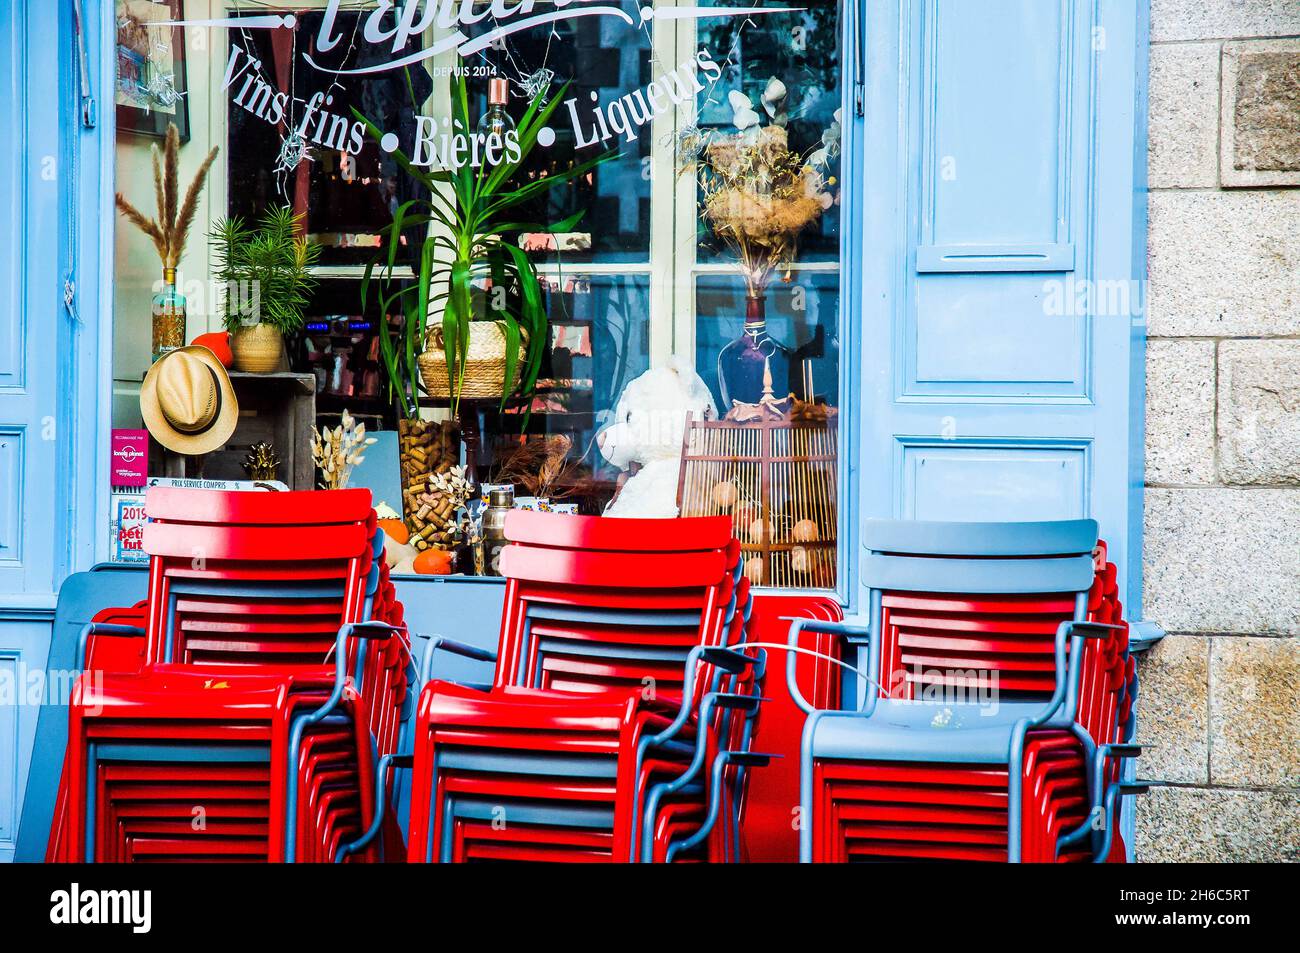 Postcard pretty exterior of a bar and cafe in Auray, Brittany, France. Red chairs against blue shutters. French lifestyle. Stock Photo